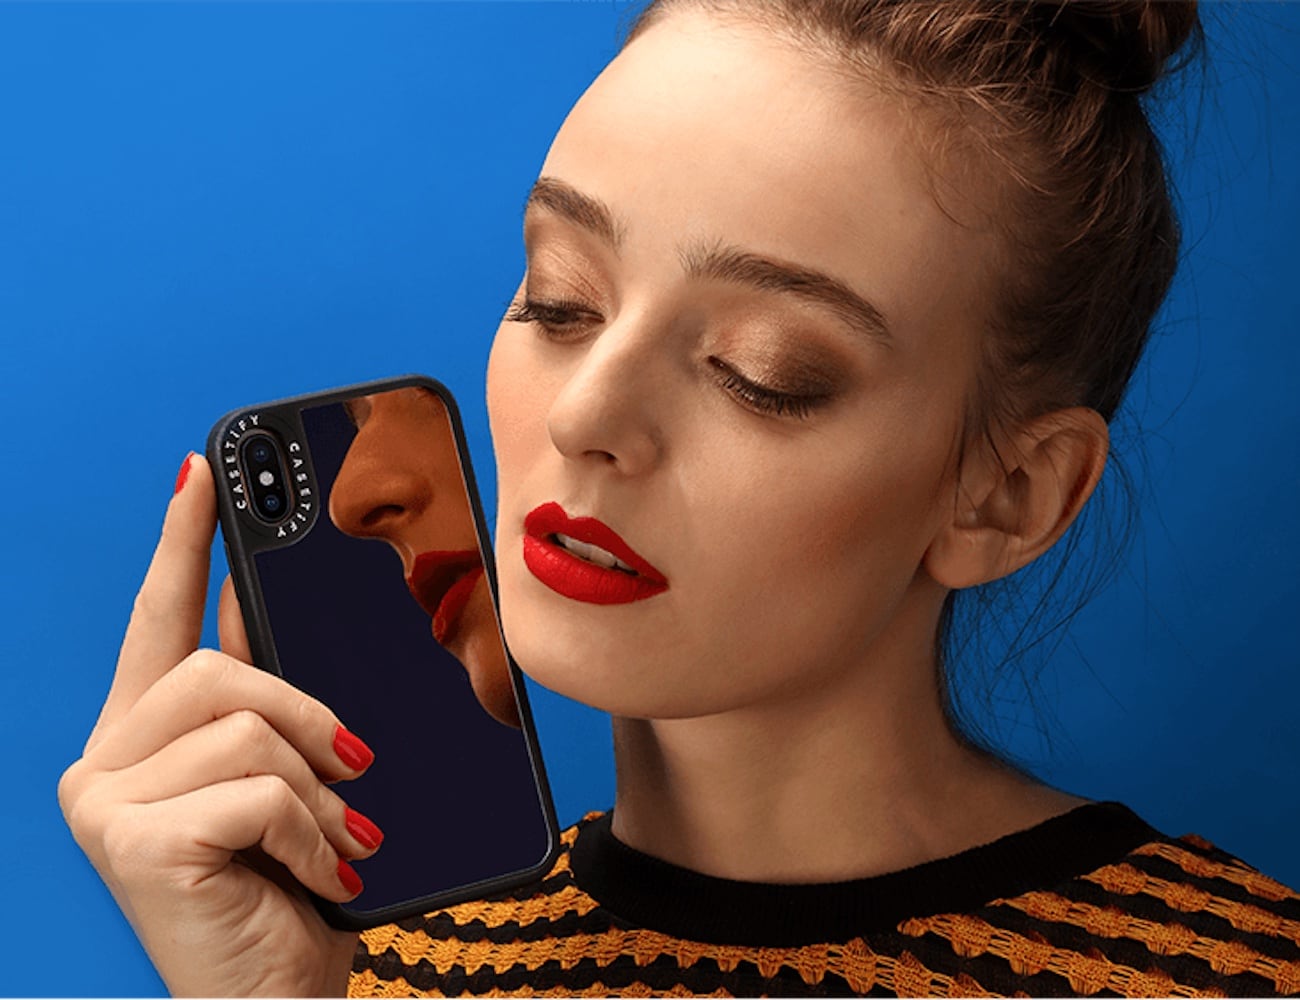 Casetify Reflective Mirror iPhone Case reflects your unique style